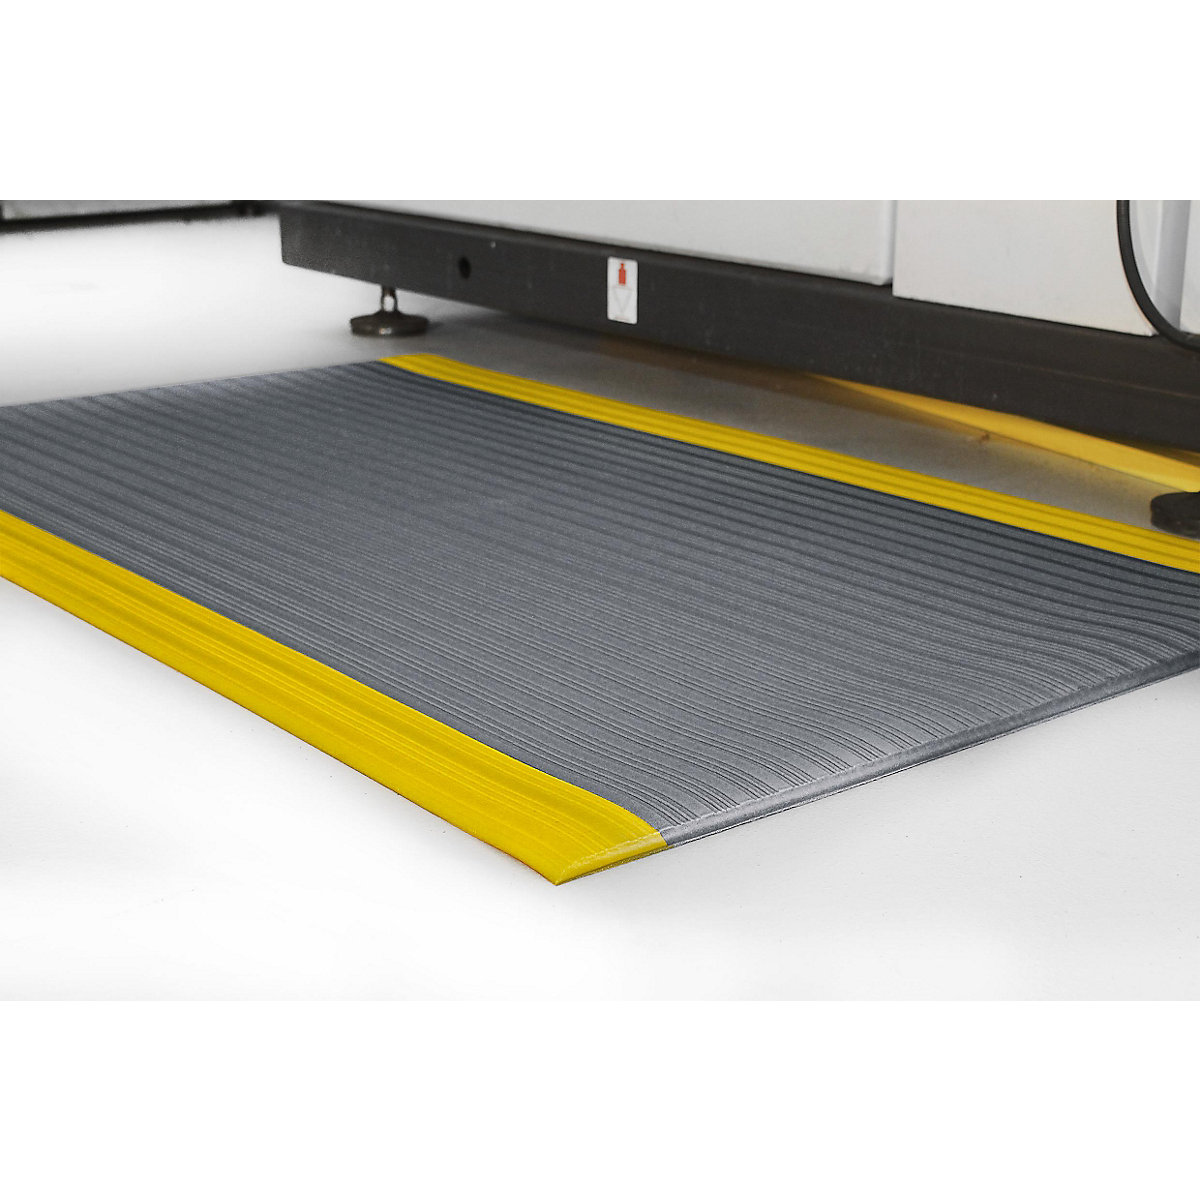 Orthomat® Ribbed anti-fatigue matting, LxW 900 x 600 mm, pack of 3, grey with high visibility stripes